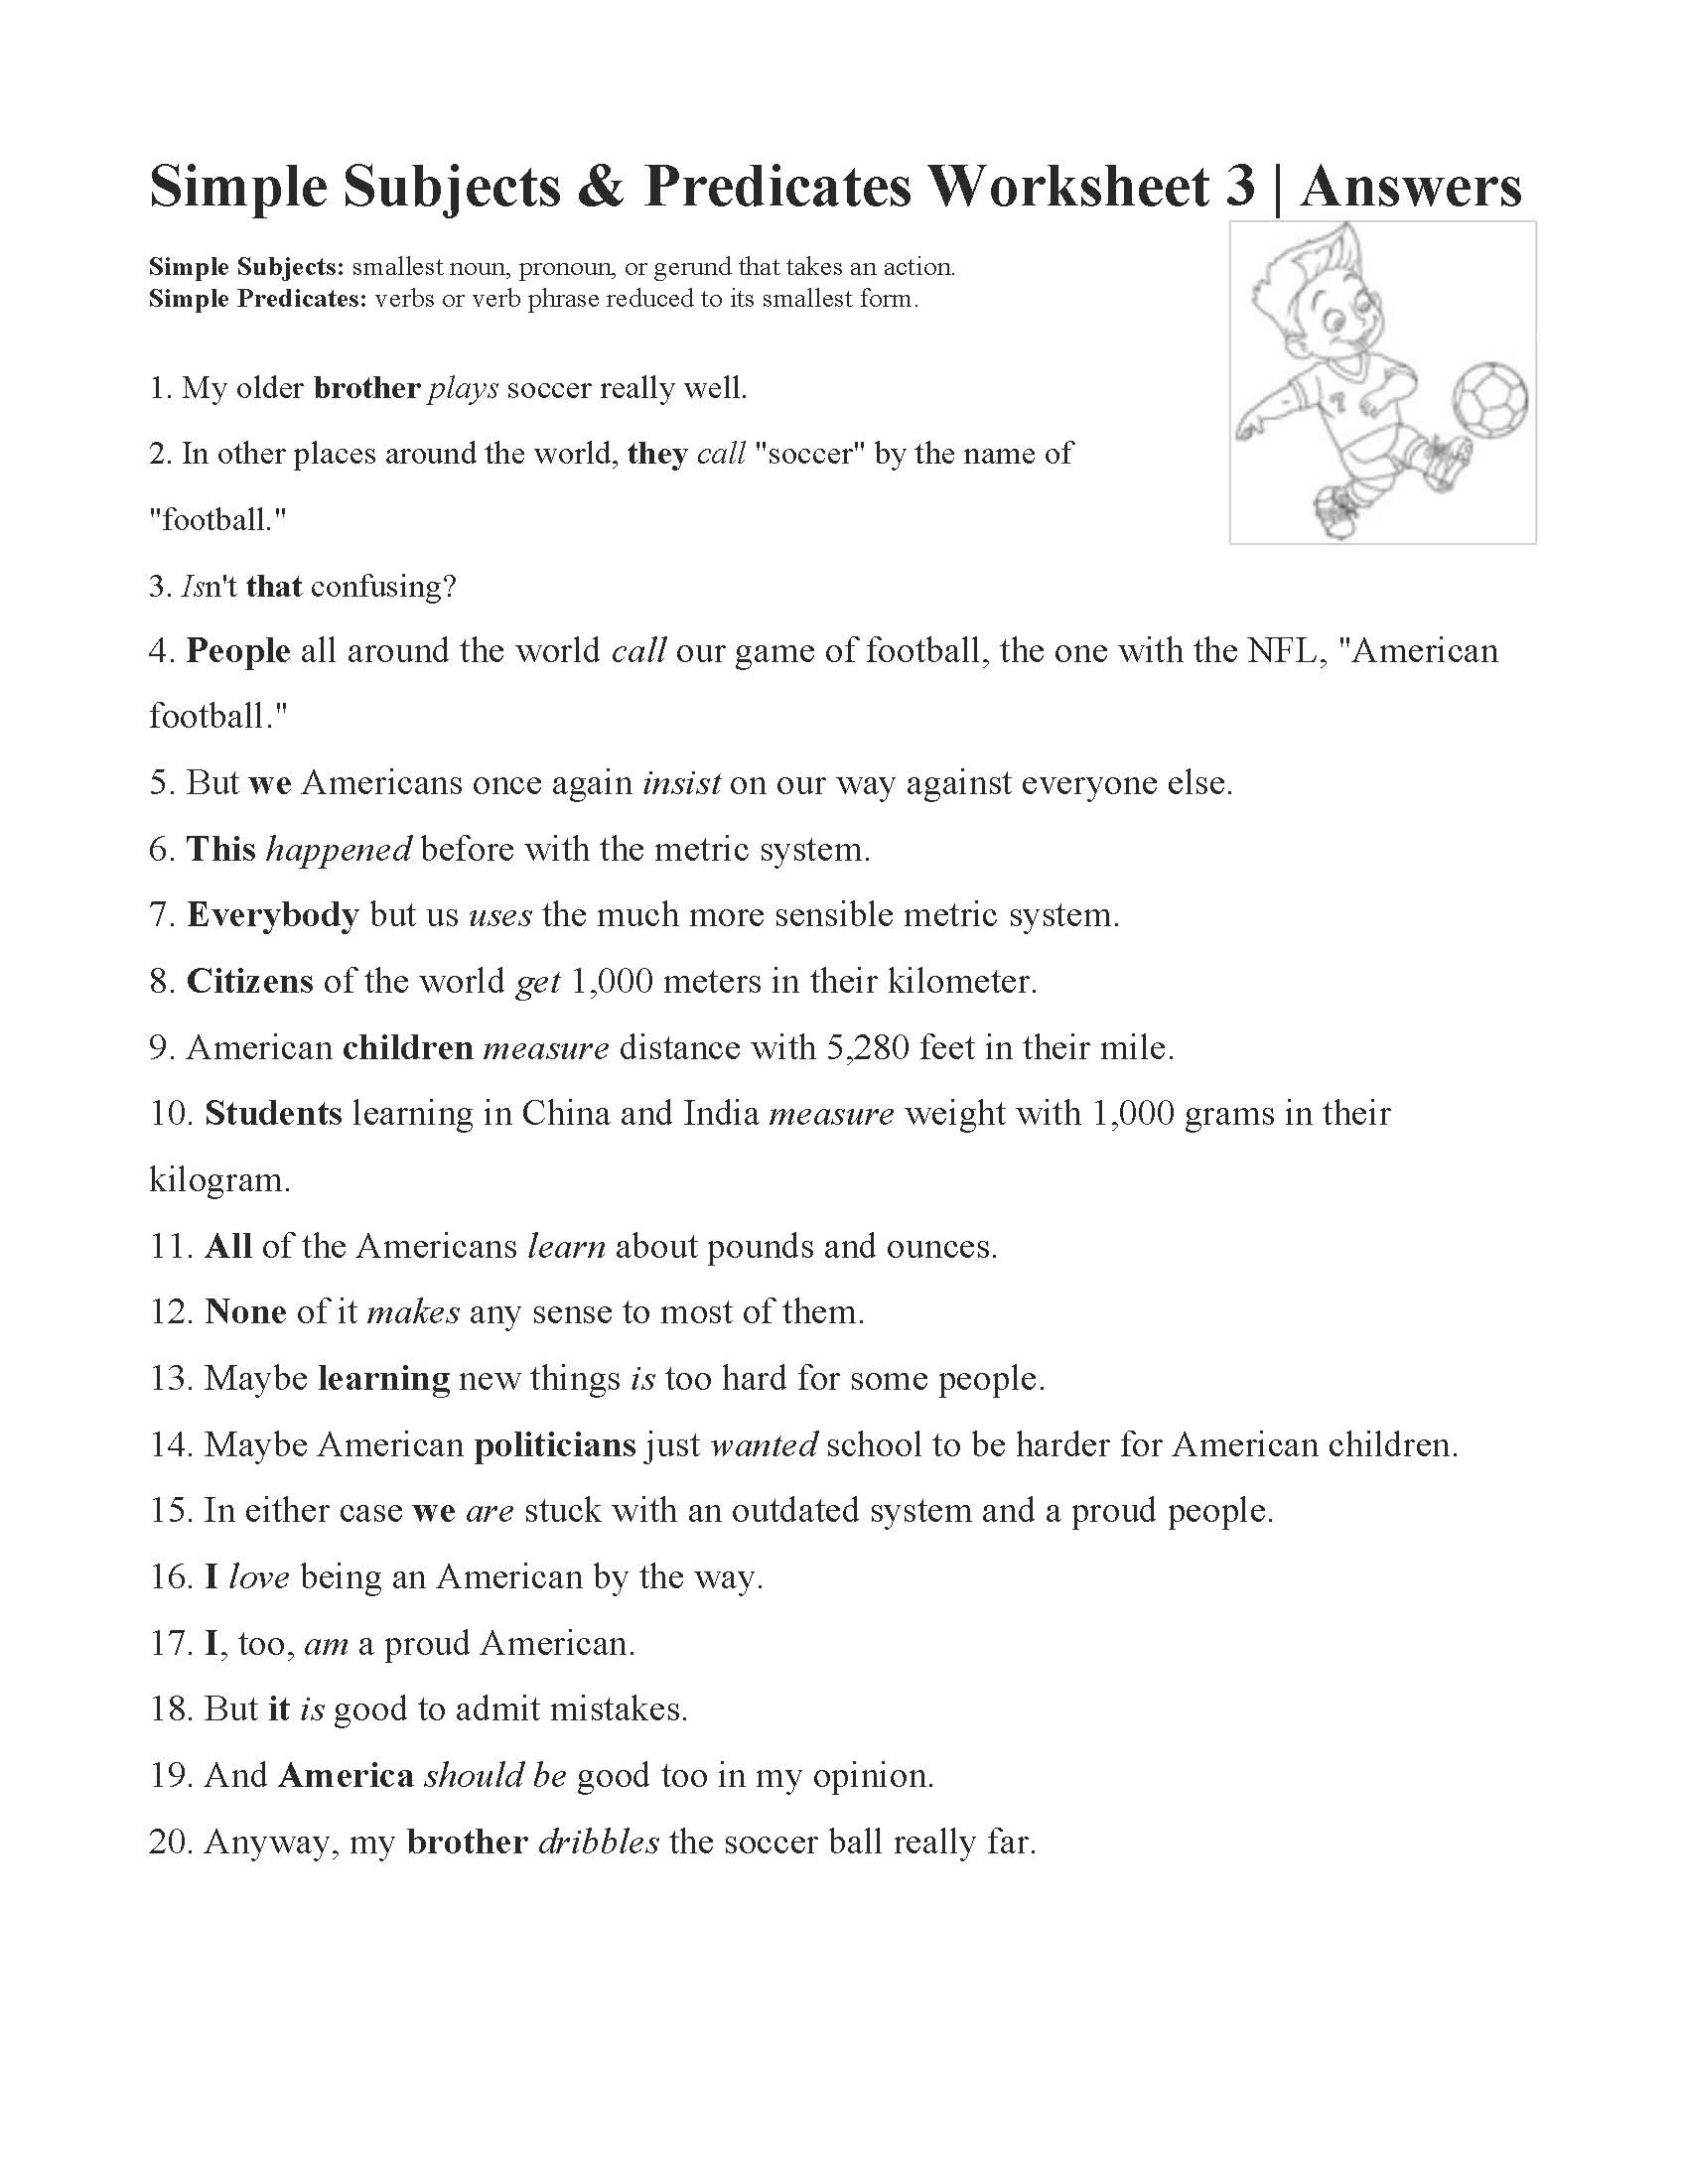 This is a preview image of Simple Subjects and Predicates Worksheet 3. Click on it to enlarge it or view the source file.